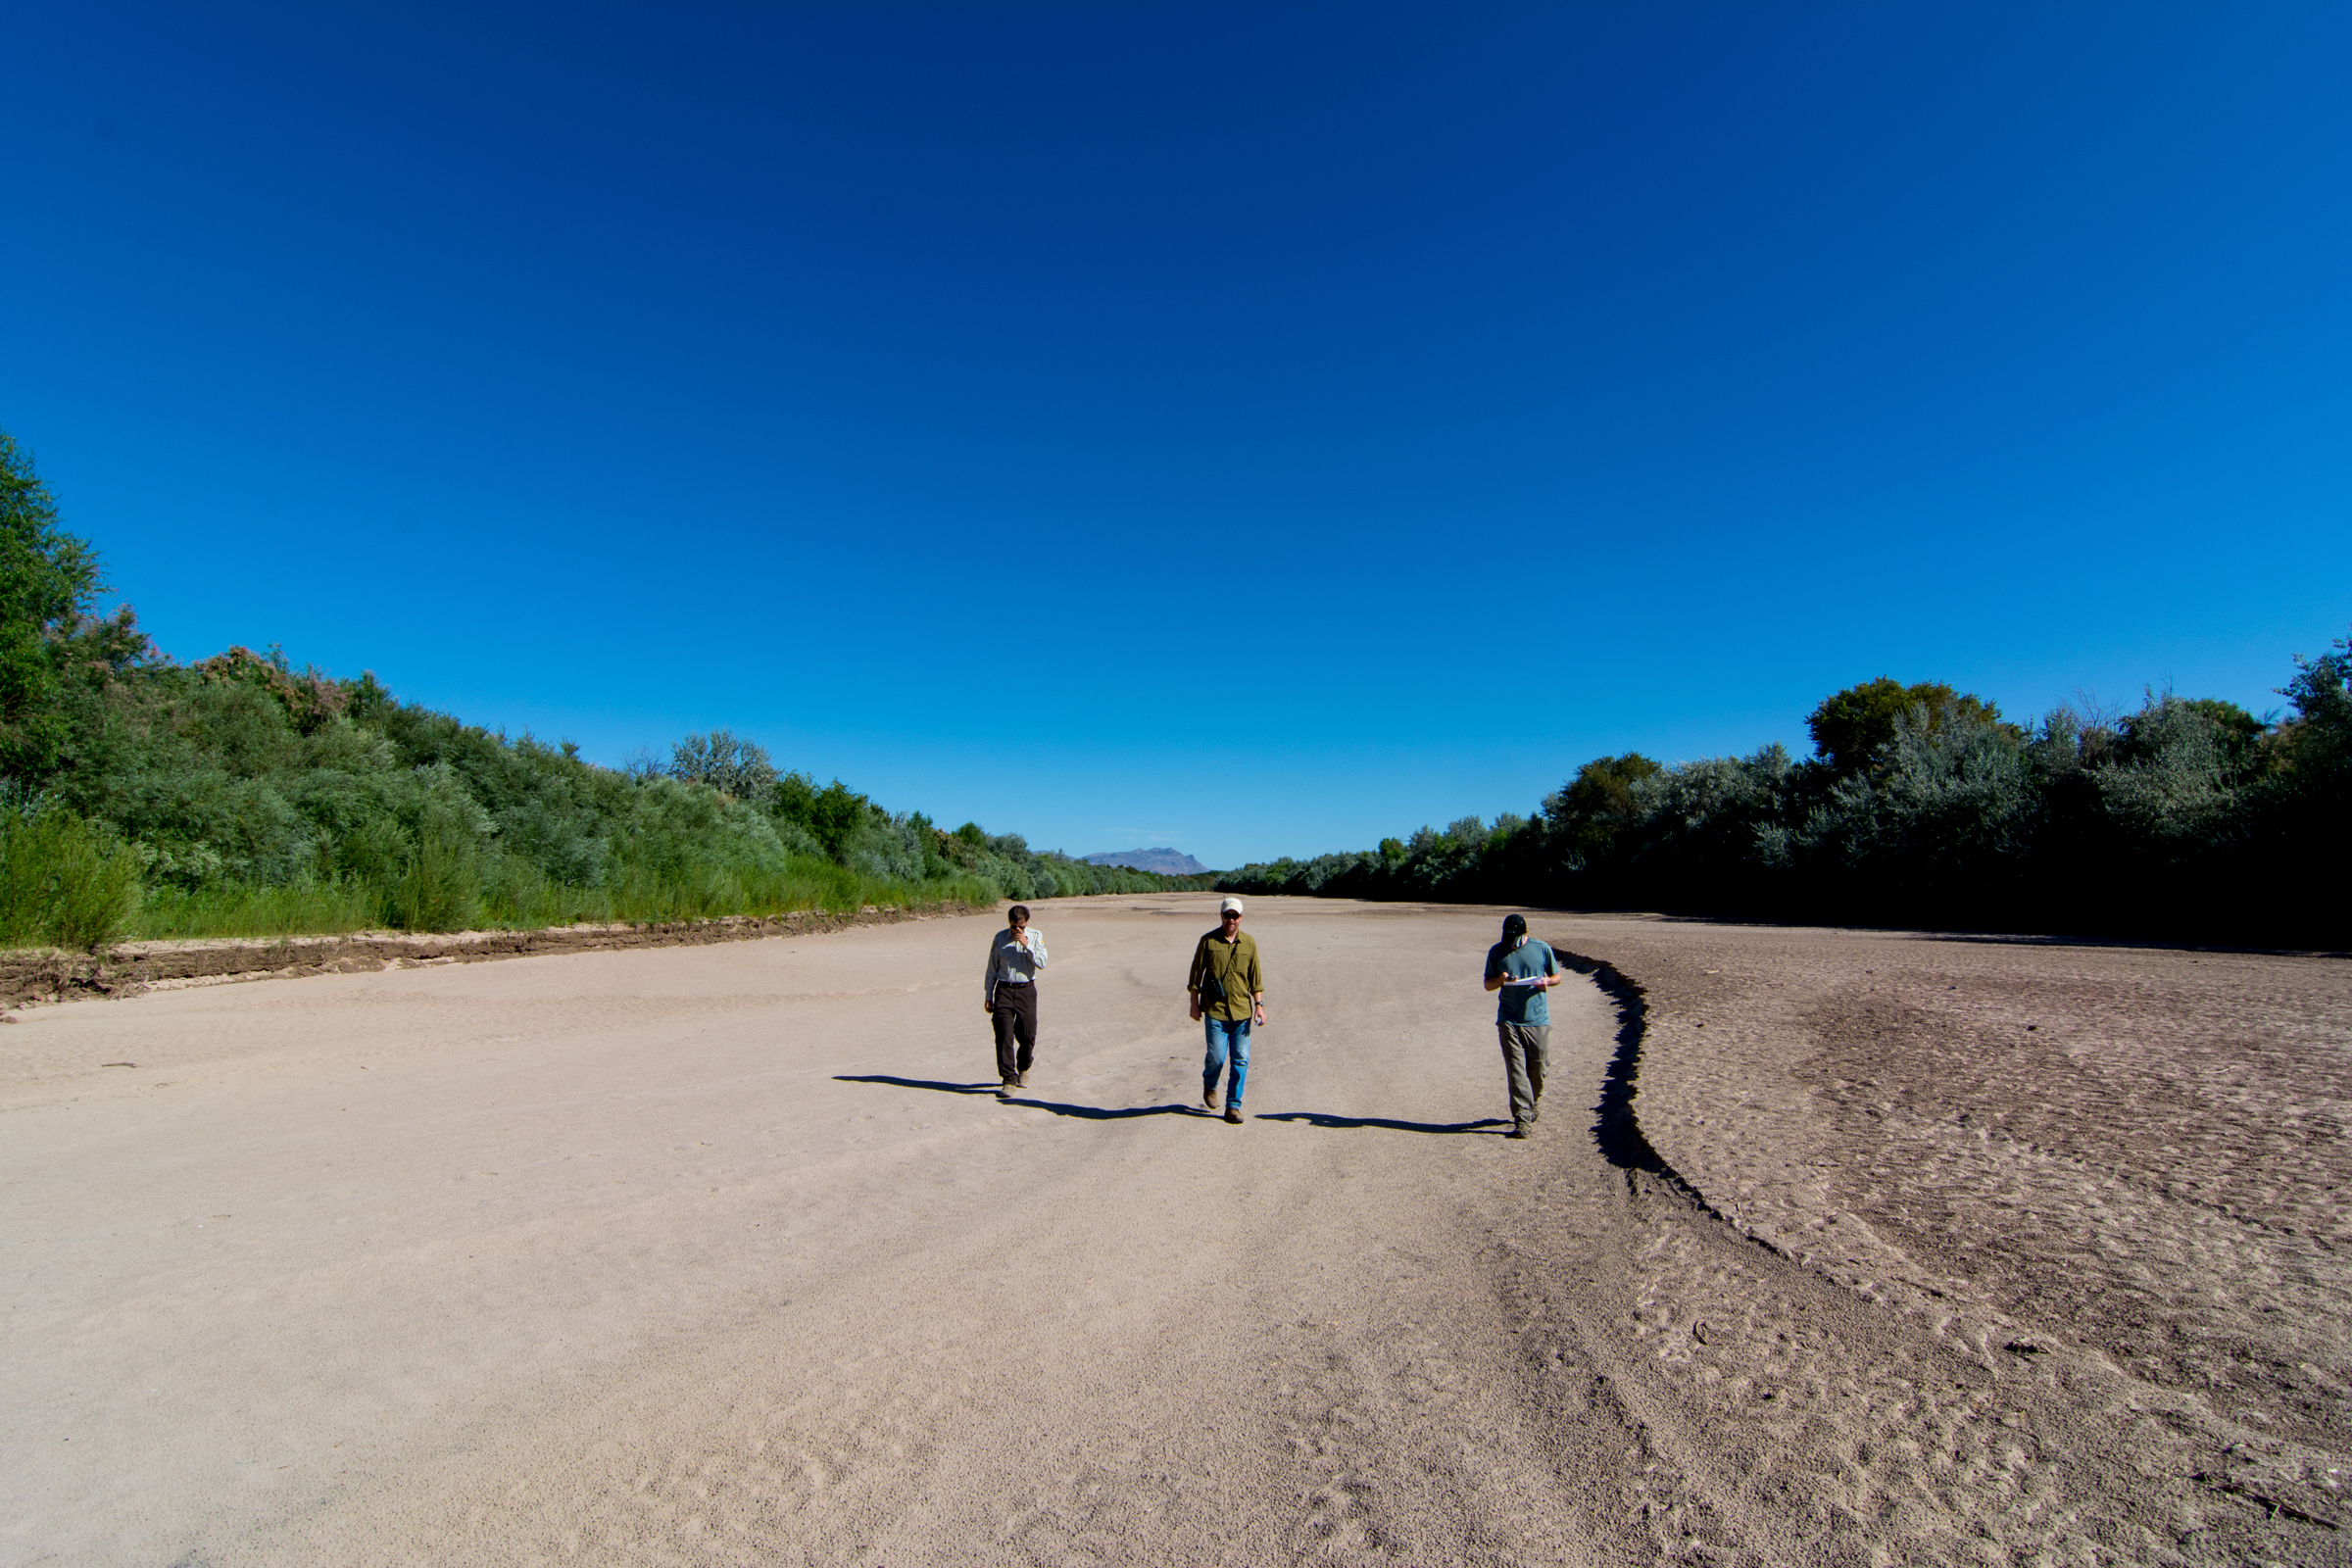 Agency scientists visiting Rio Grande at Bosque del Apache National Wildlife Refuge, which dries almost every year